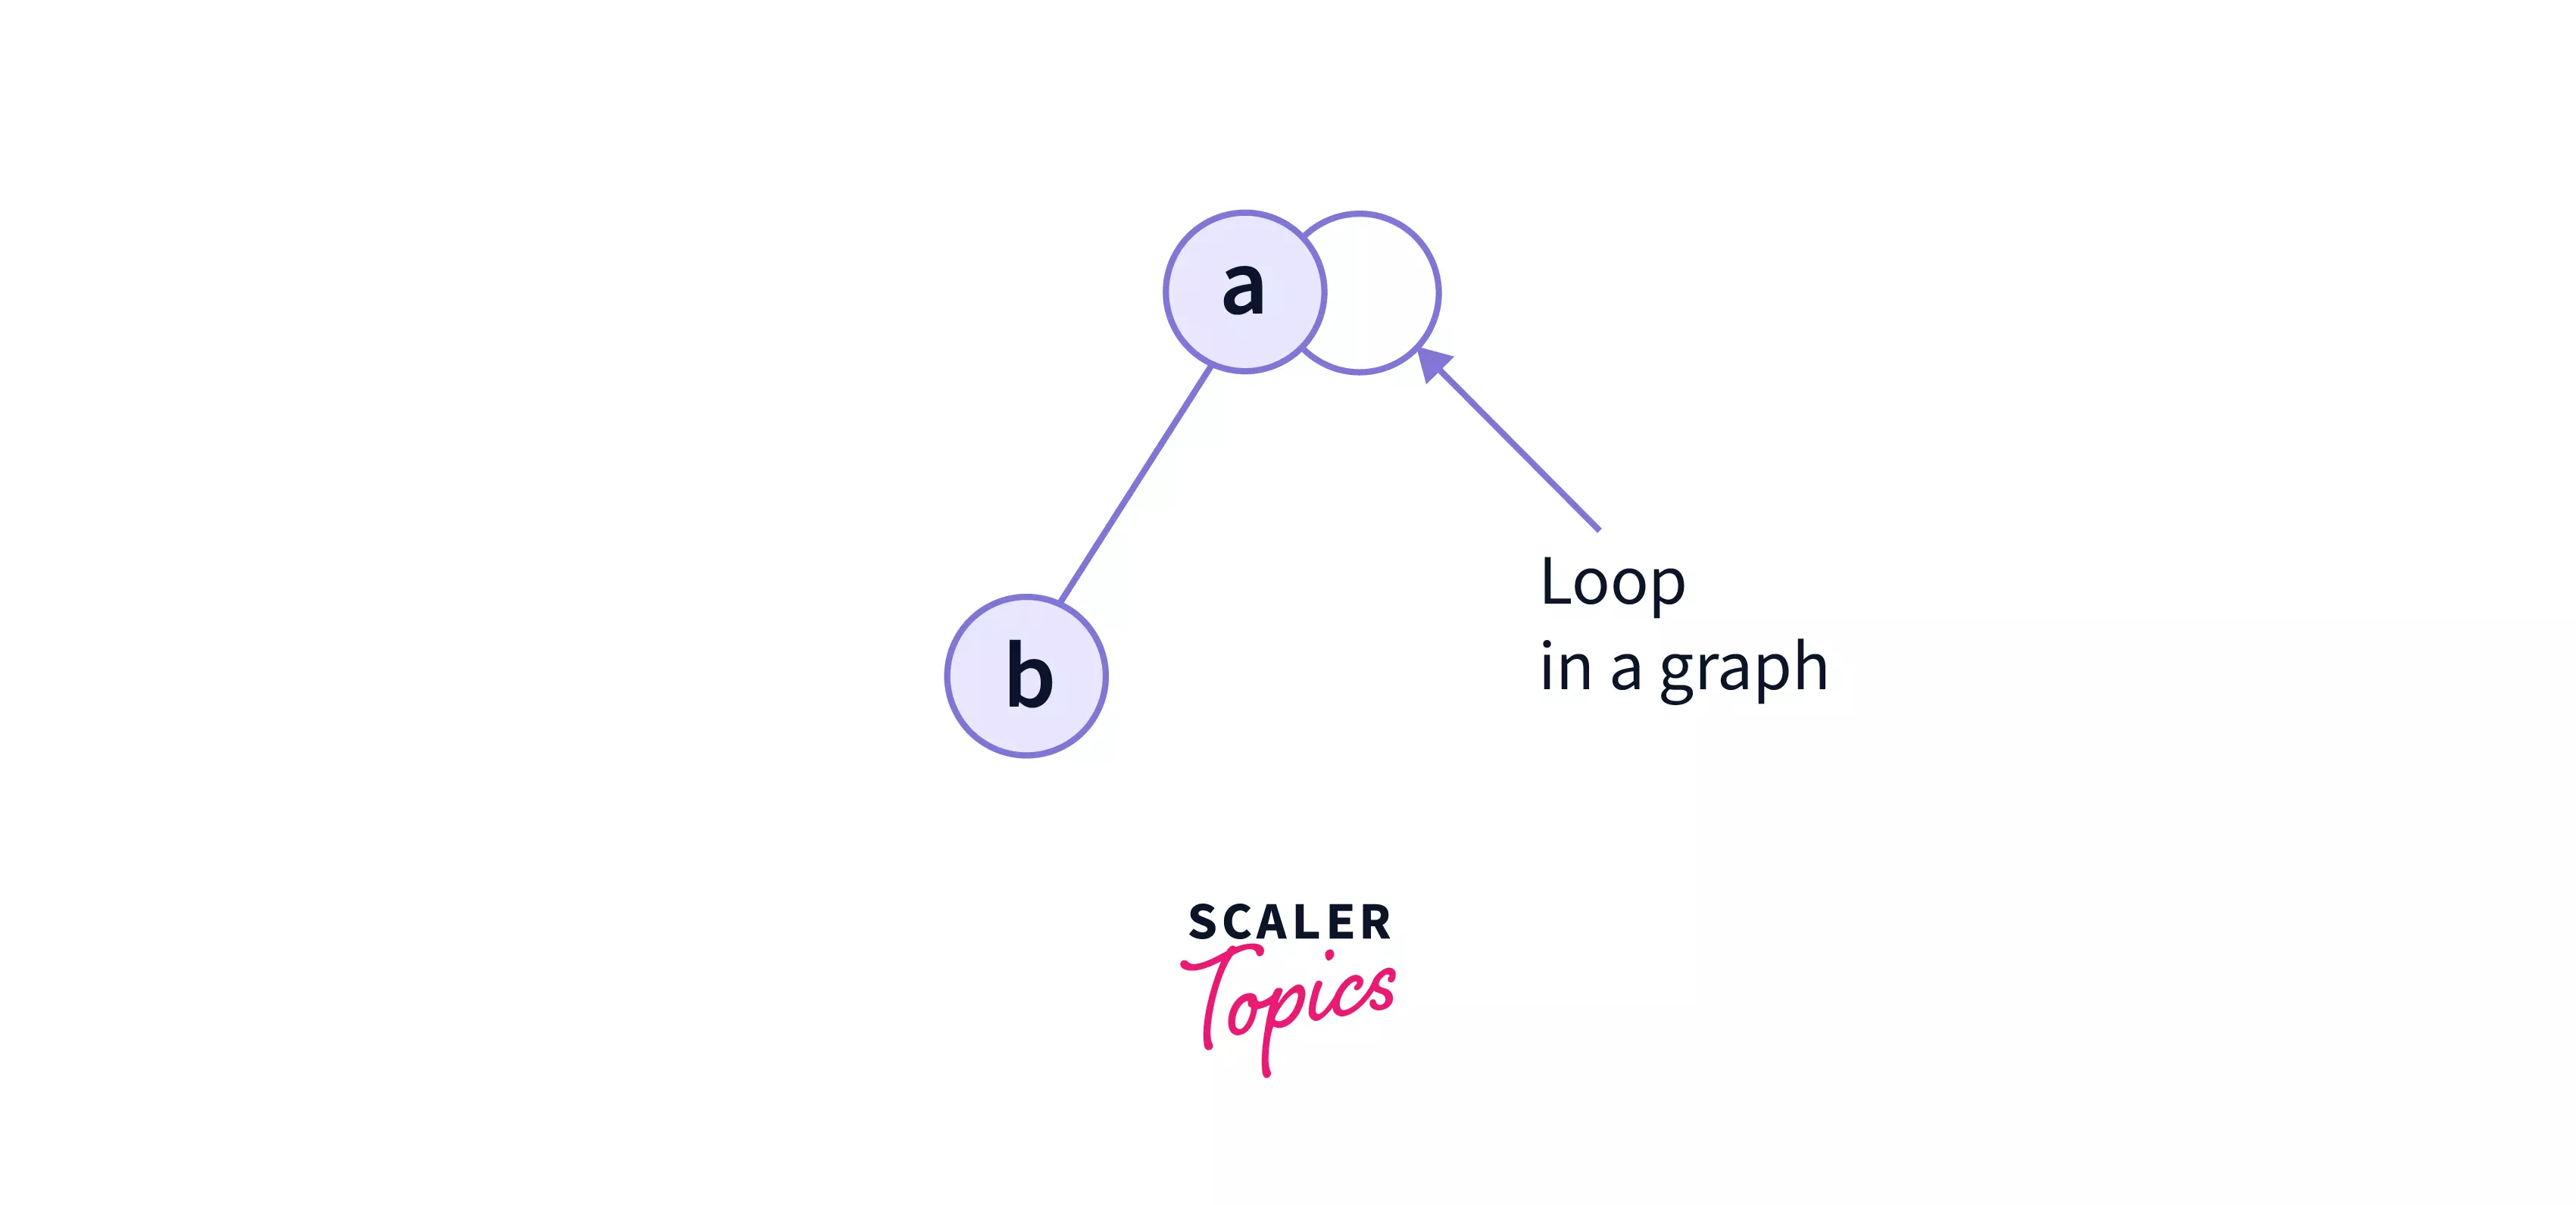 Loop in a graph